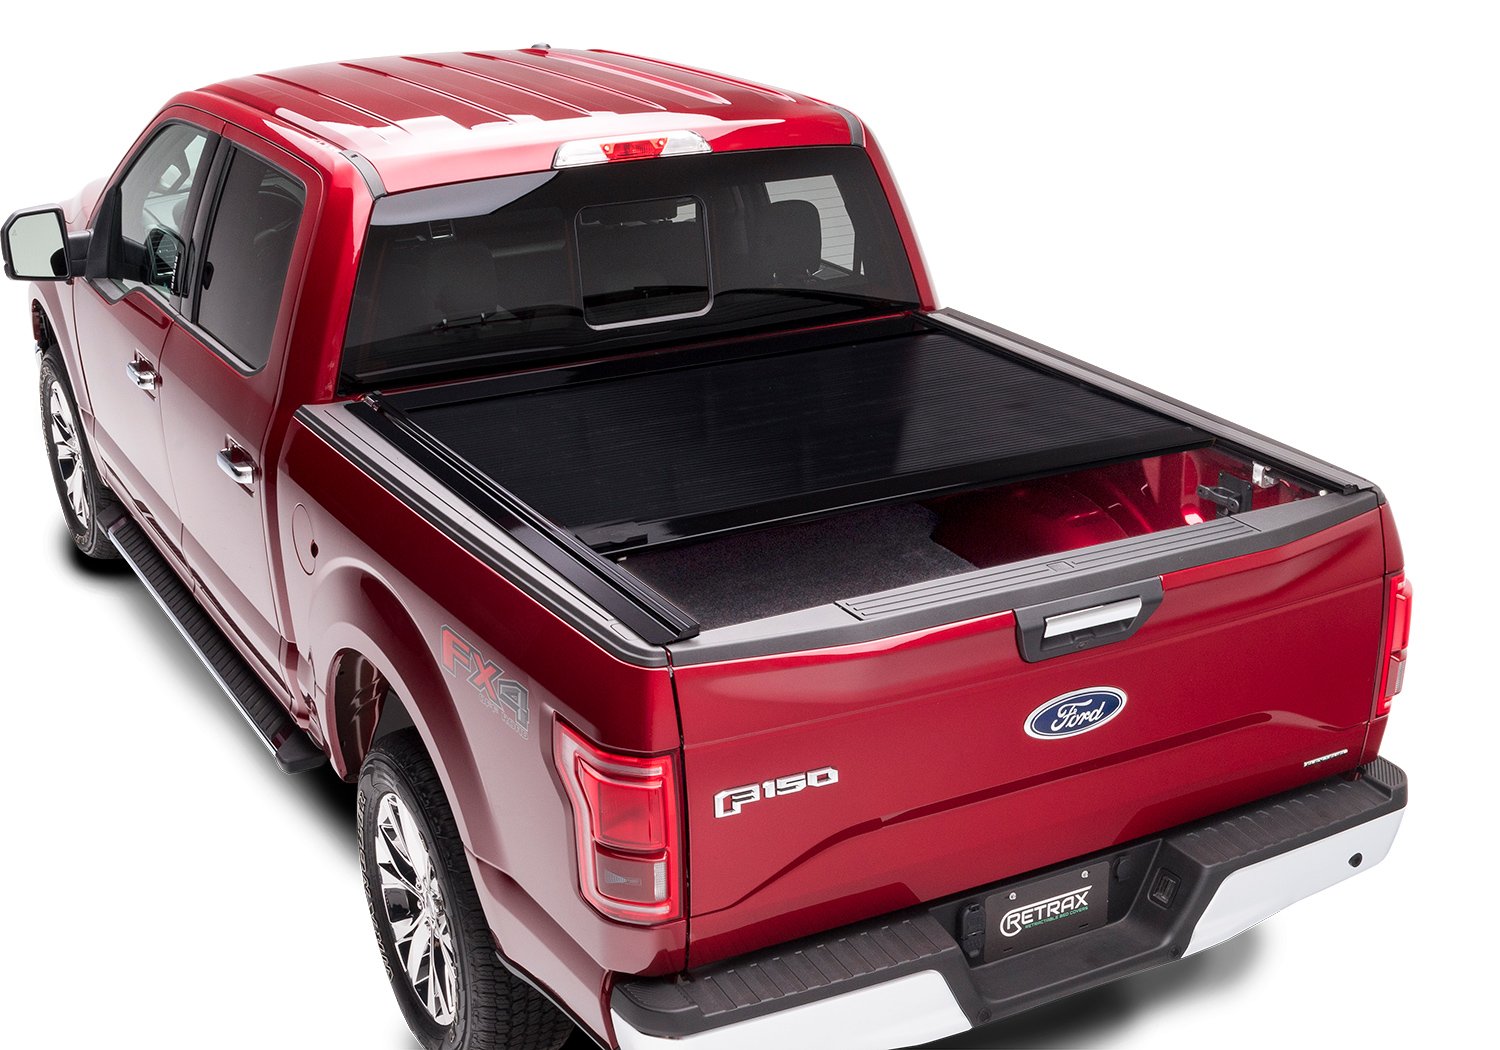 17Current Ford Raptor PowerTrax XR Series Bed Cover